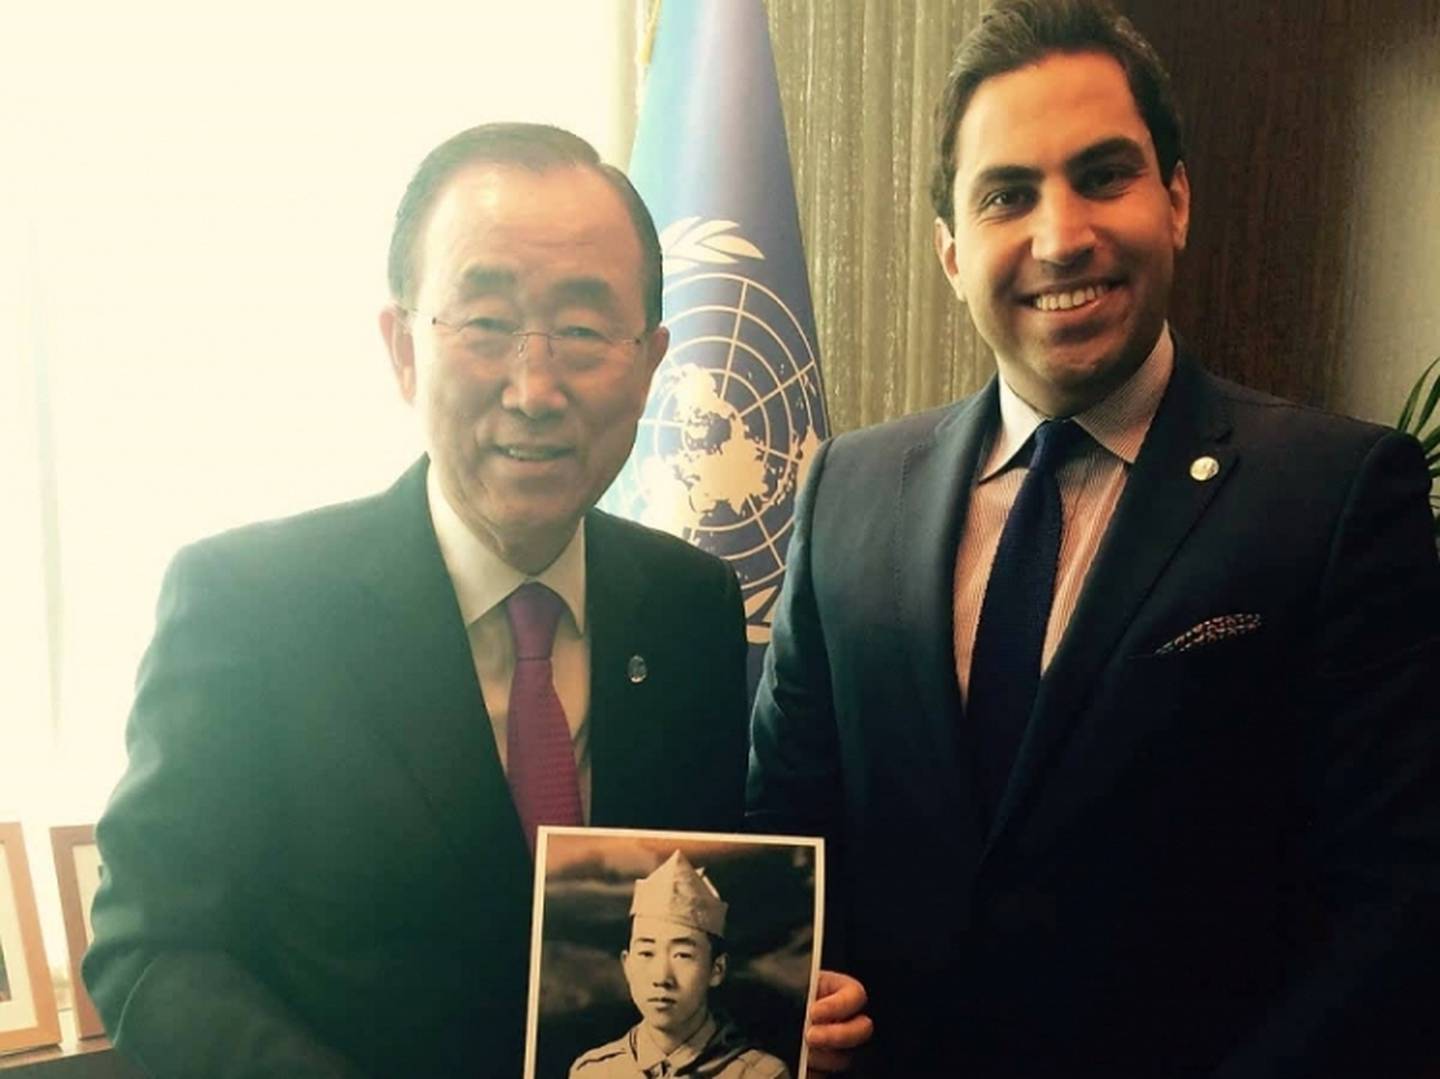 Even though he was losing his UN Youth Envoy, no one was more delighted than the organisation's secretary general Ban Ki-moon, who dug out a photograph of his younger self as a scout when Ahmad Alhendawi came to his office to break the news.